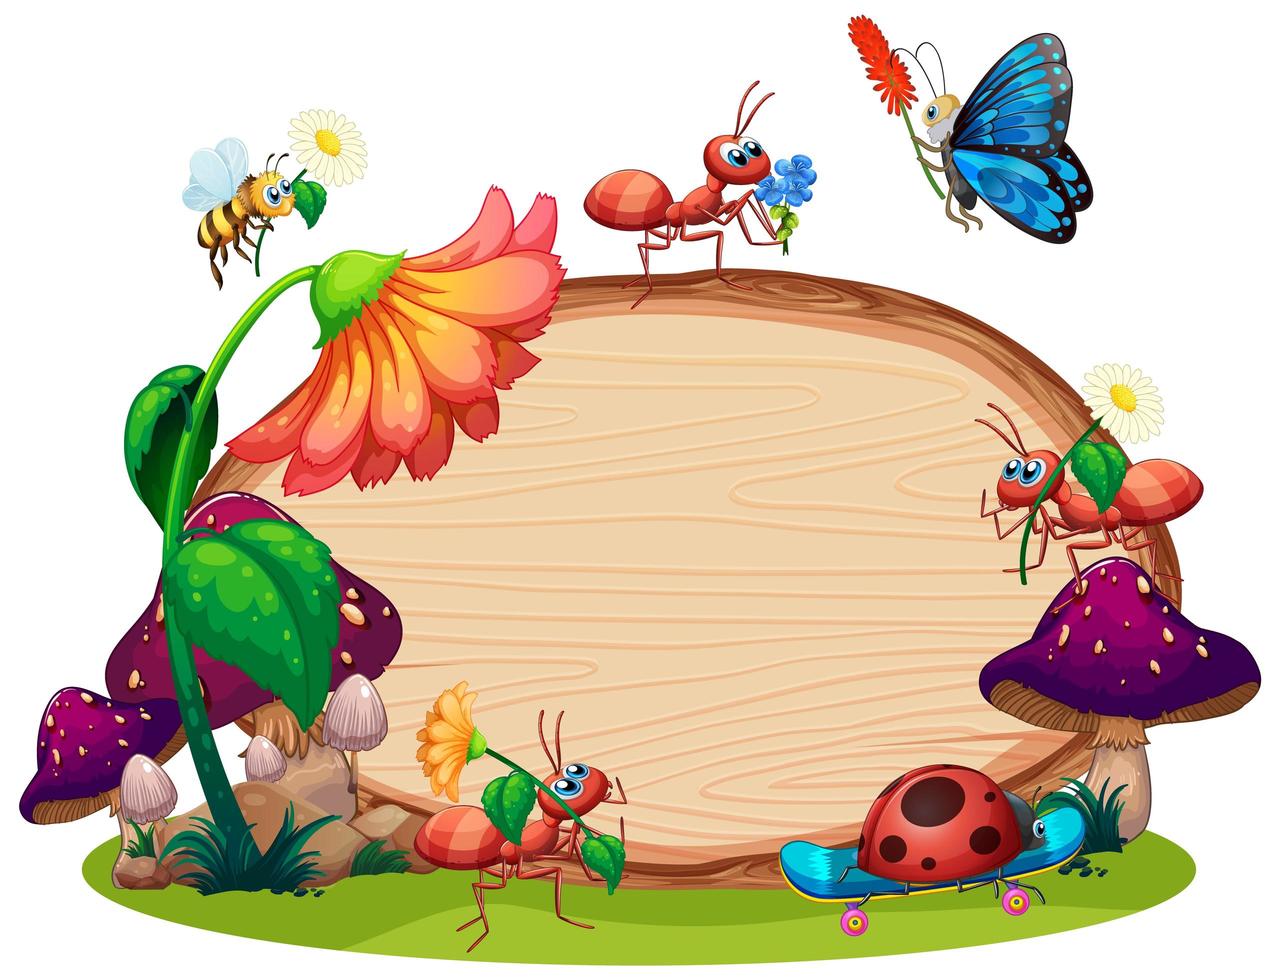 Border template design with insects in the garden background vector